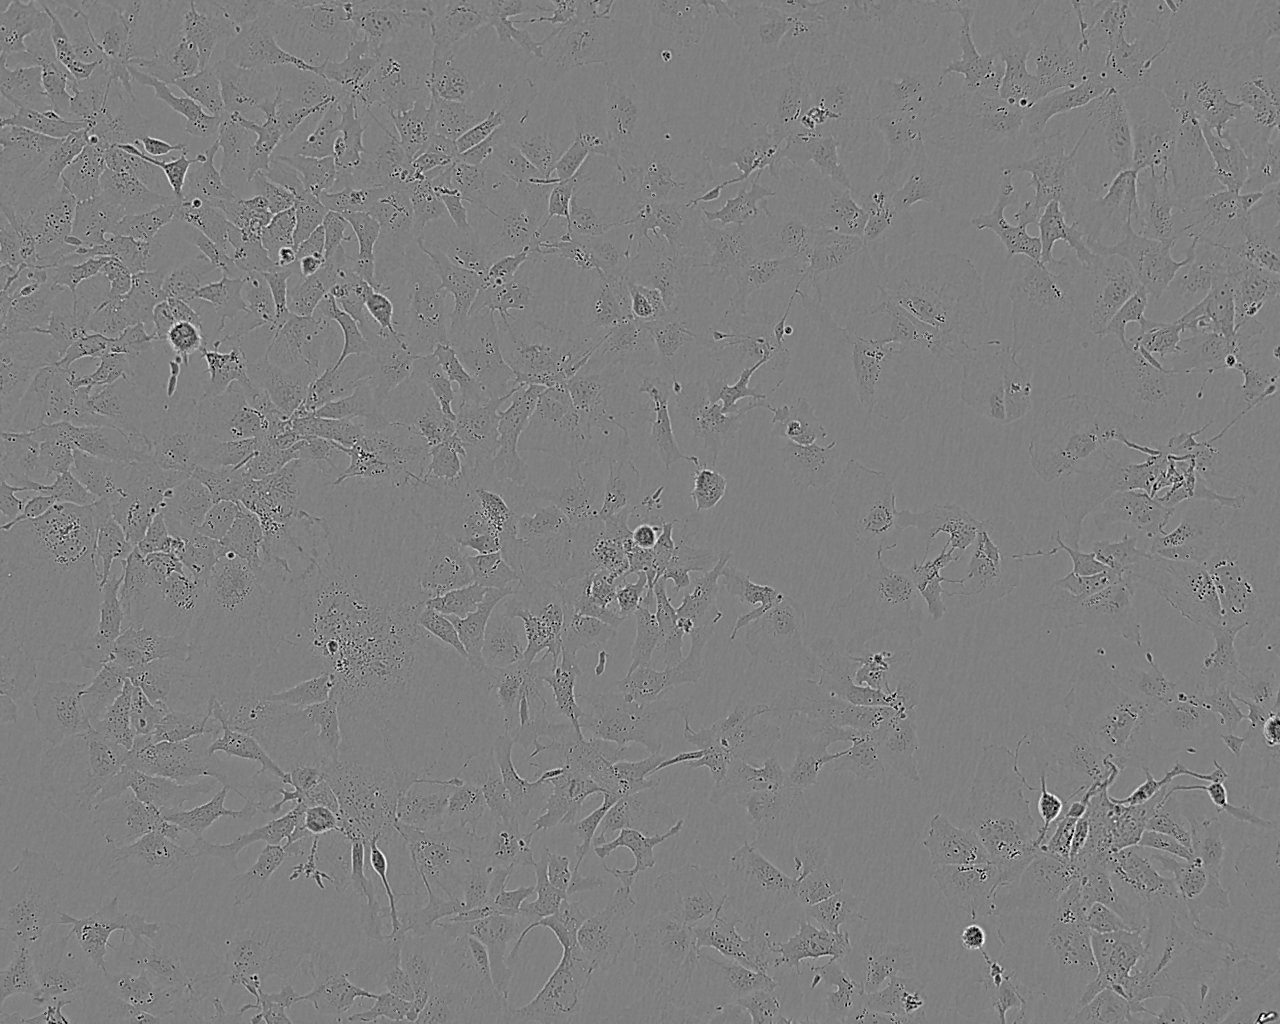 VMM39 epithelioid cells人黑色素瘤细胞系,VMM39 epithelioid cells